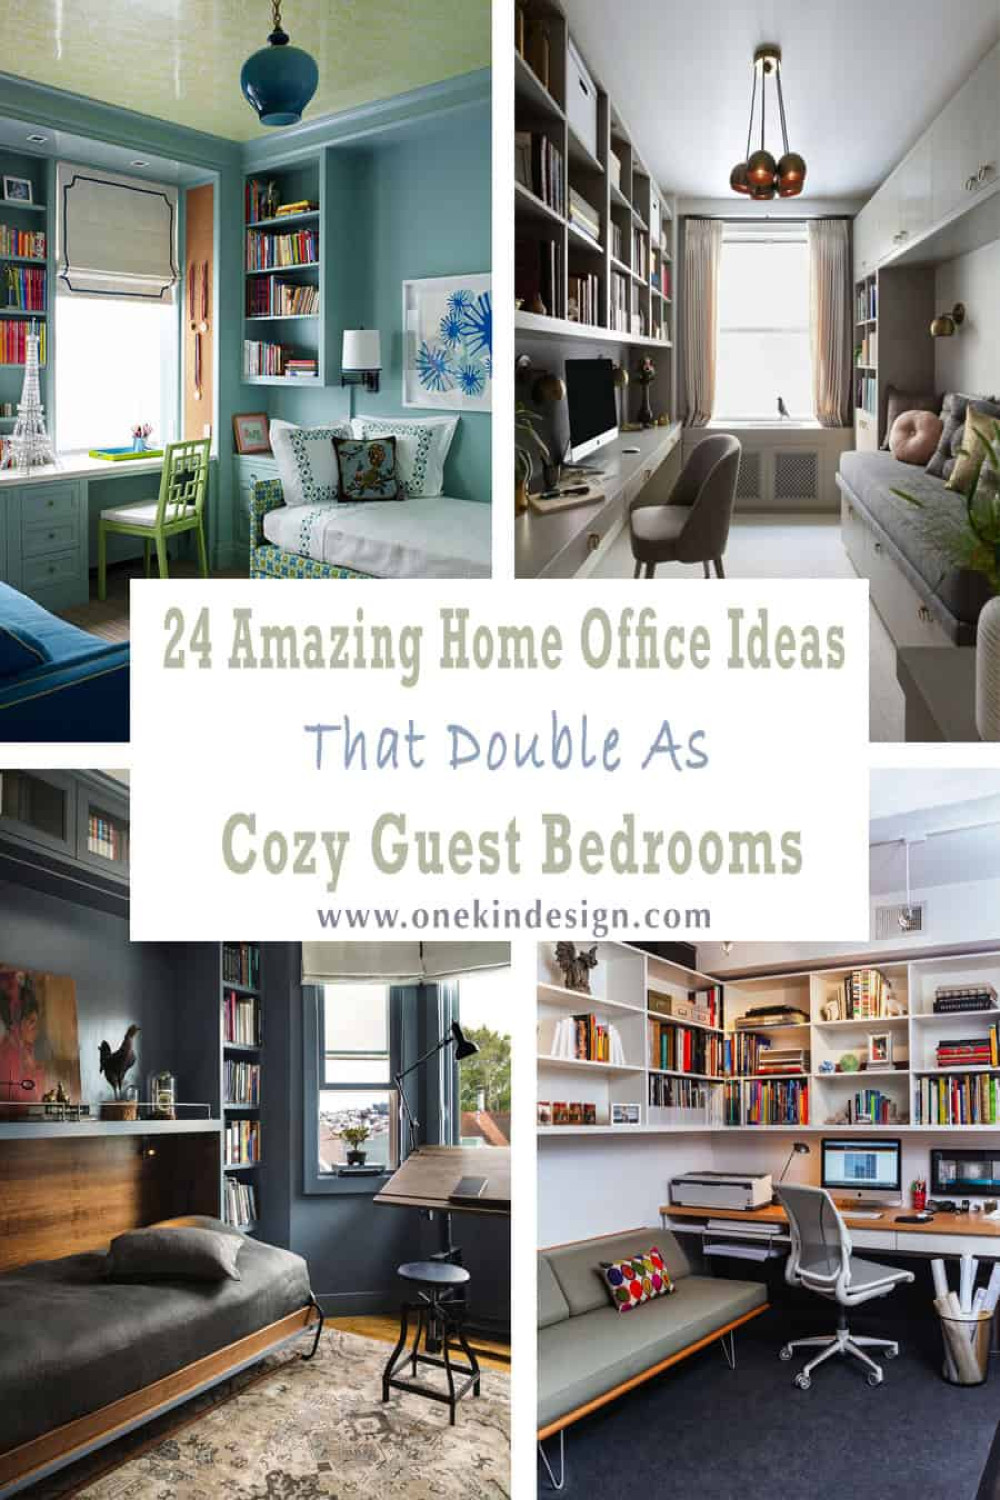 Amazing Home Office Ideas That Double As Cozy Guest Bedrooms